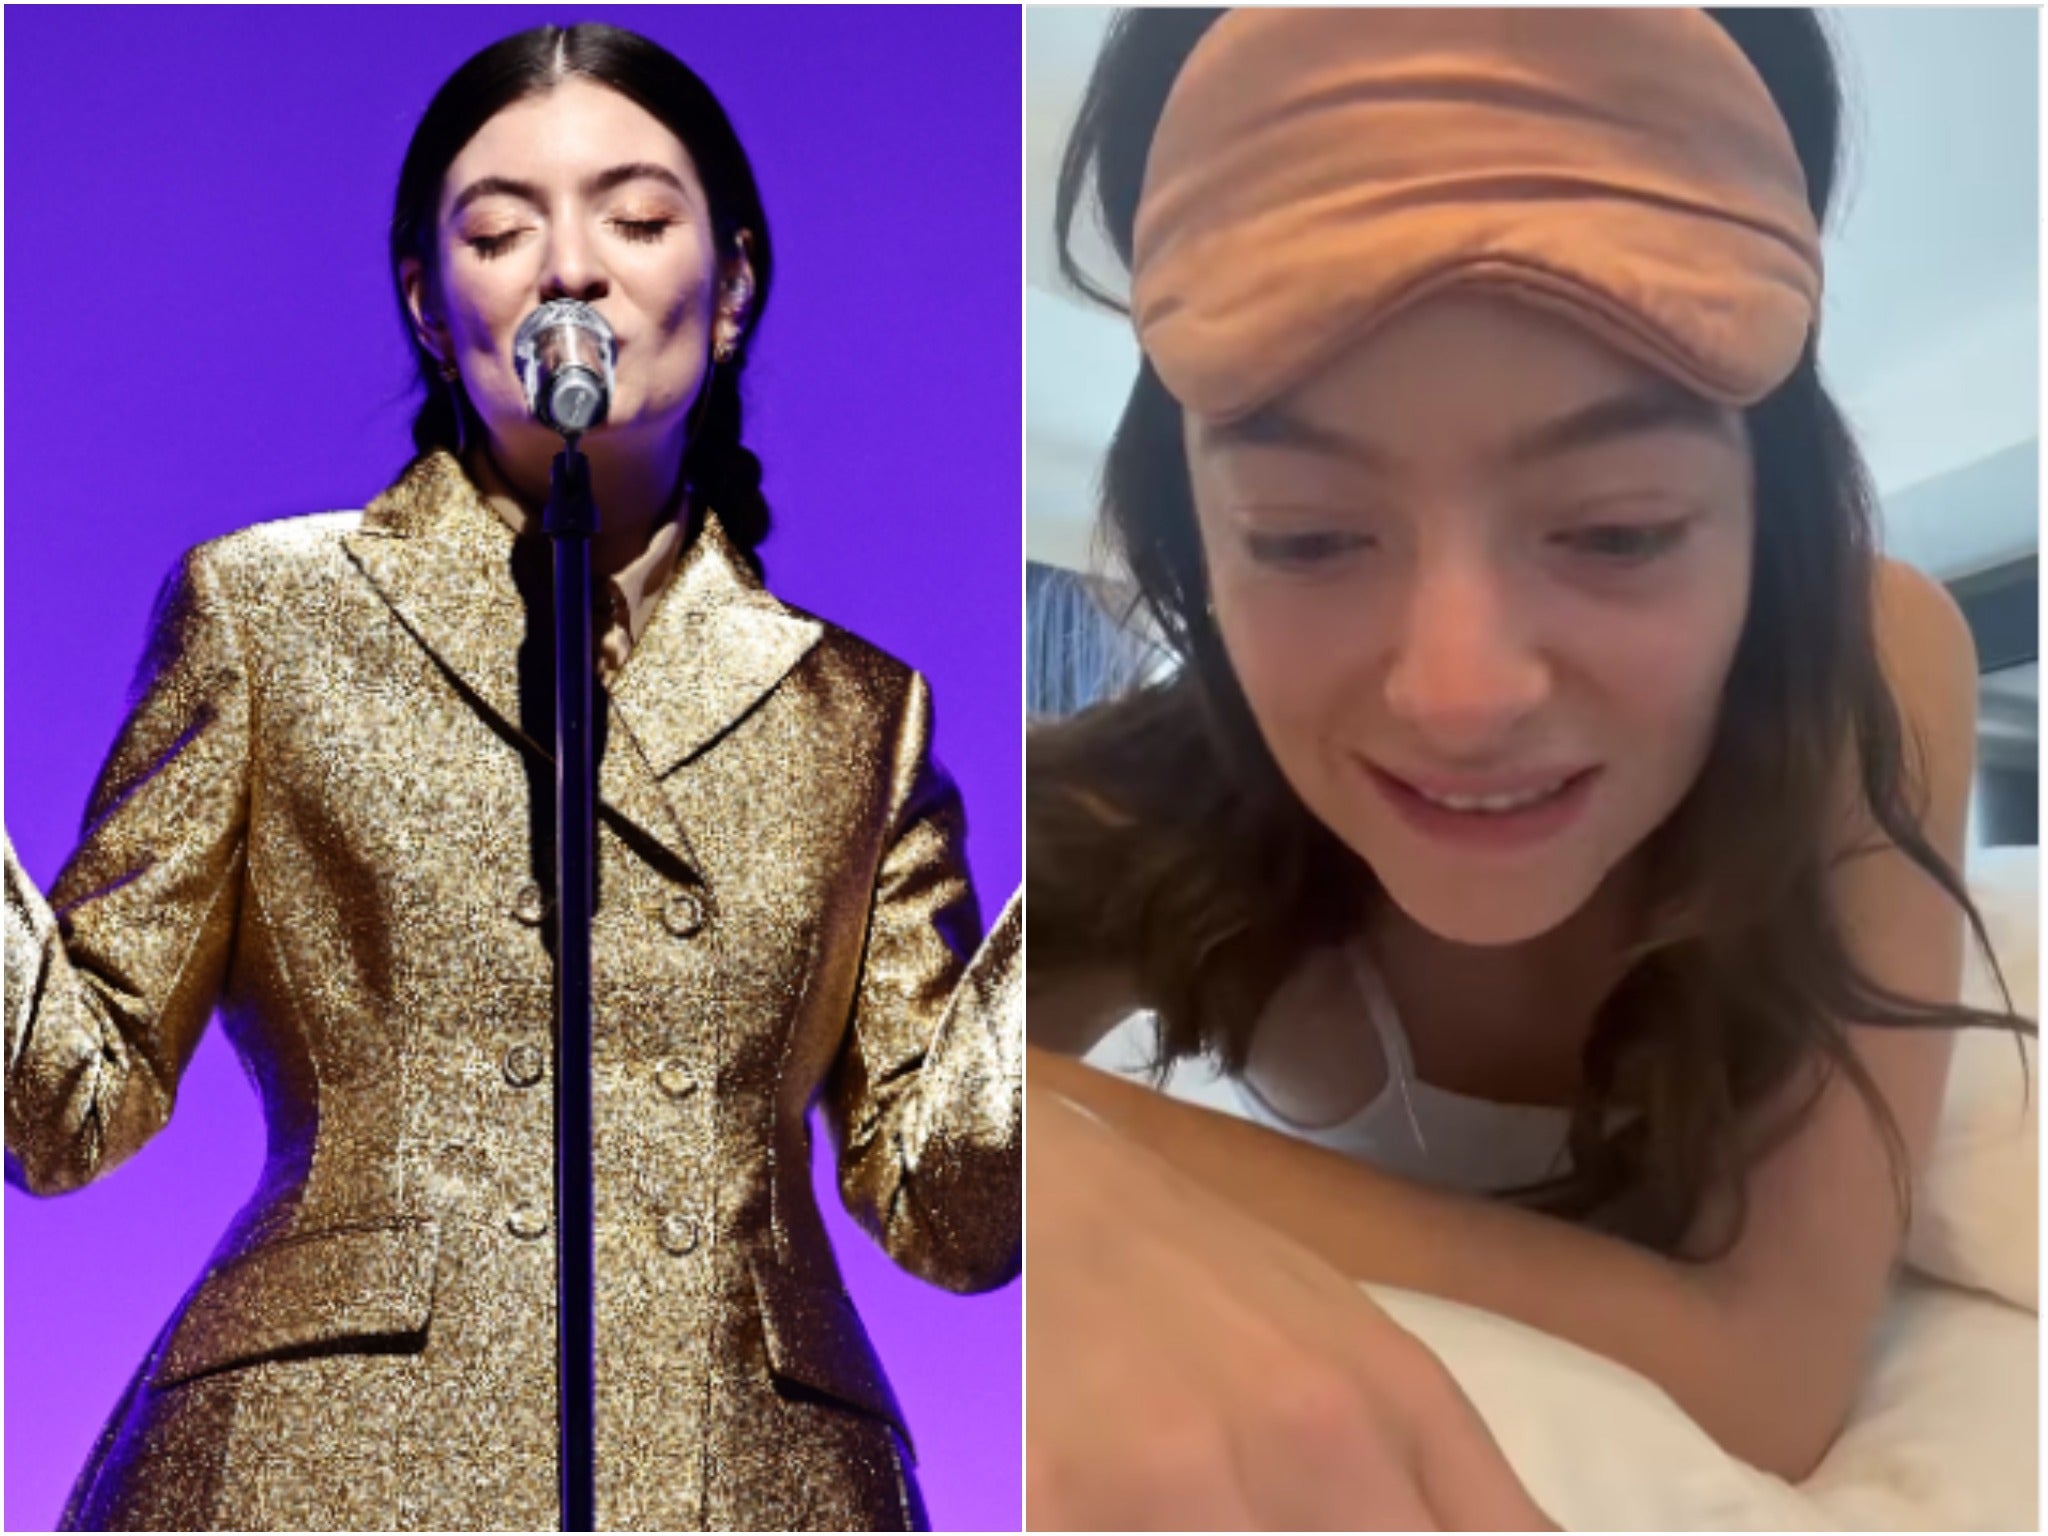 Lorde addresses videos of her shushing people at past concerts